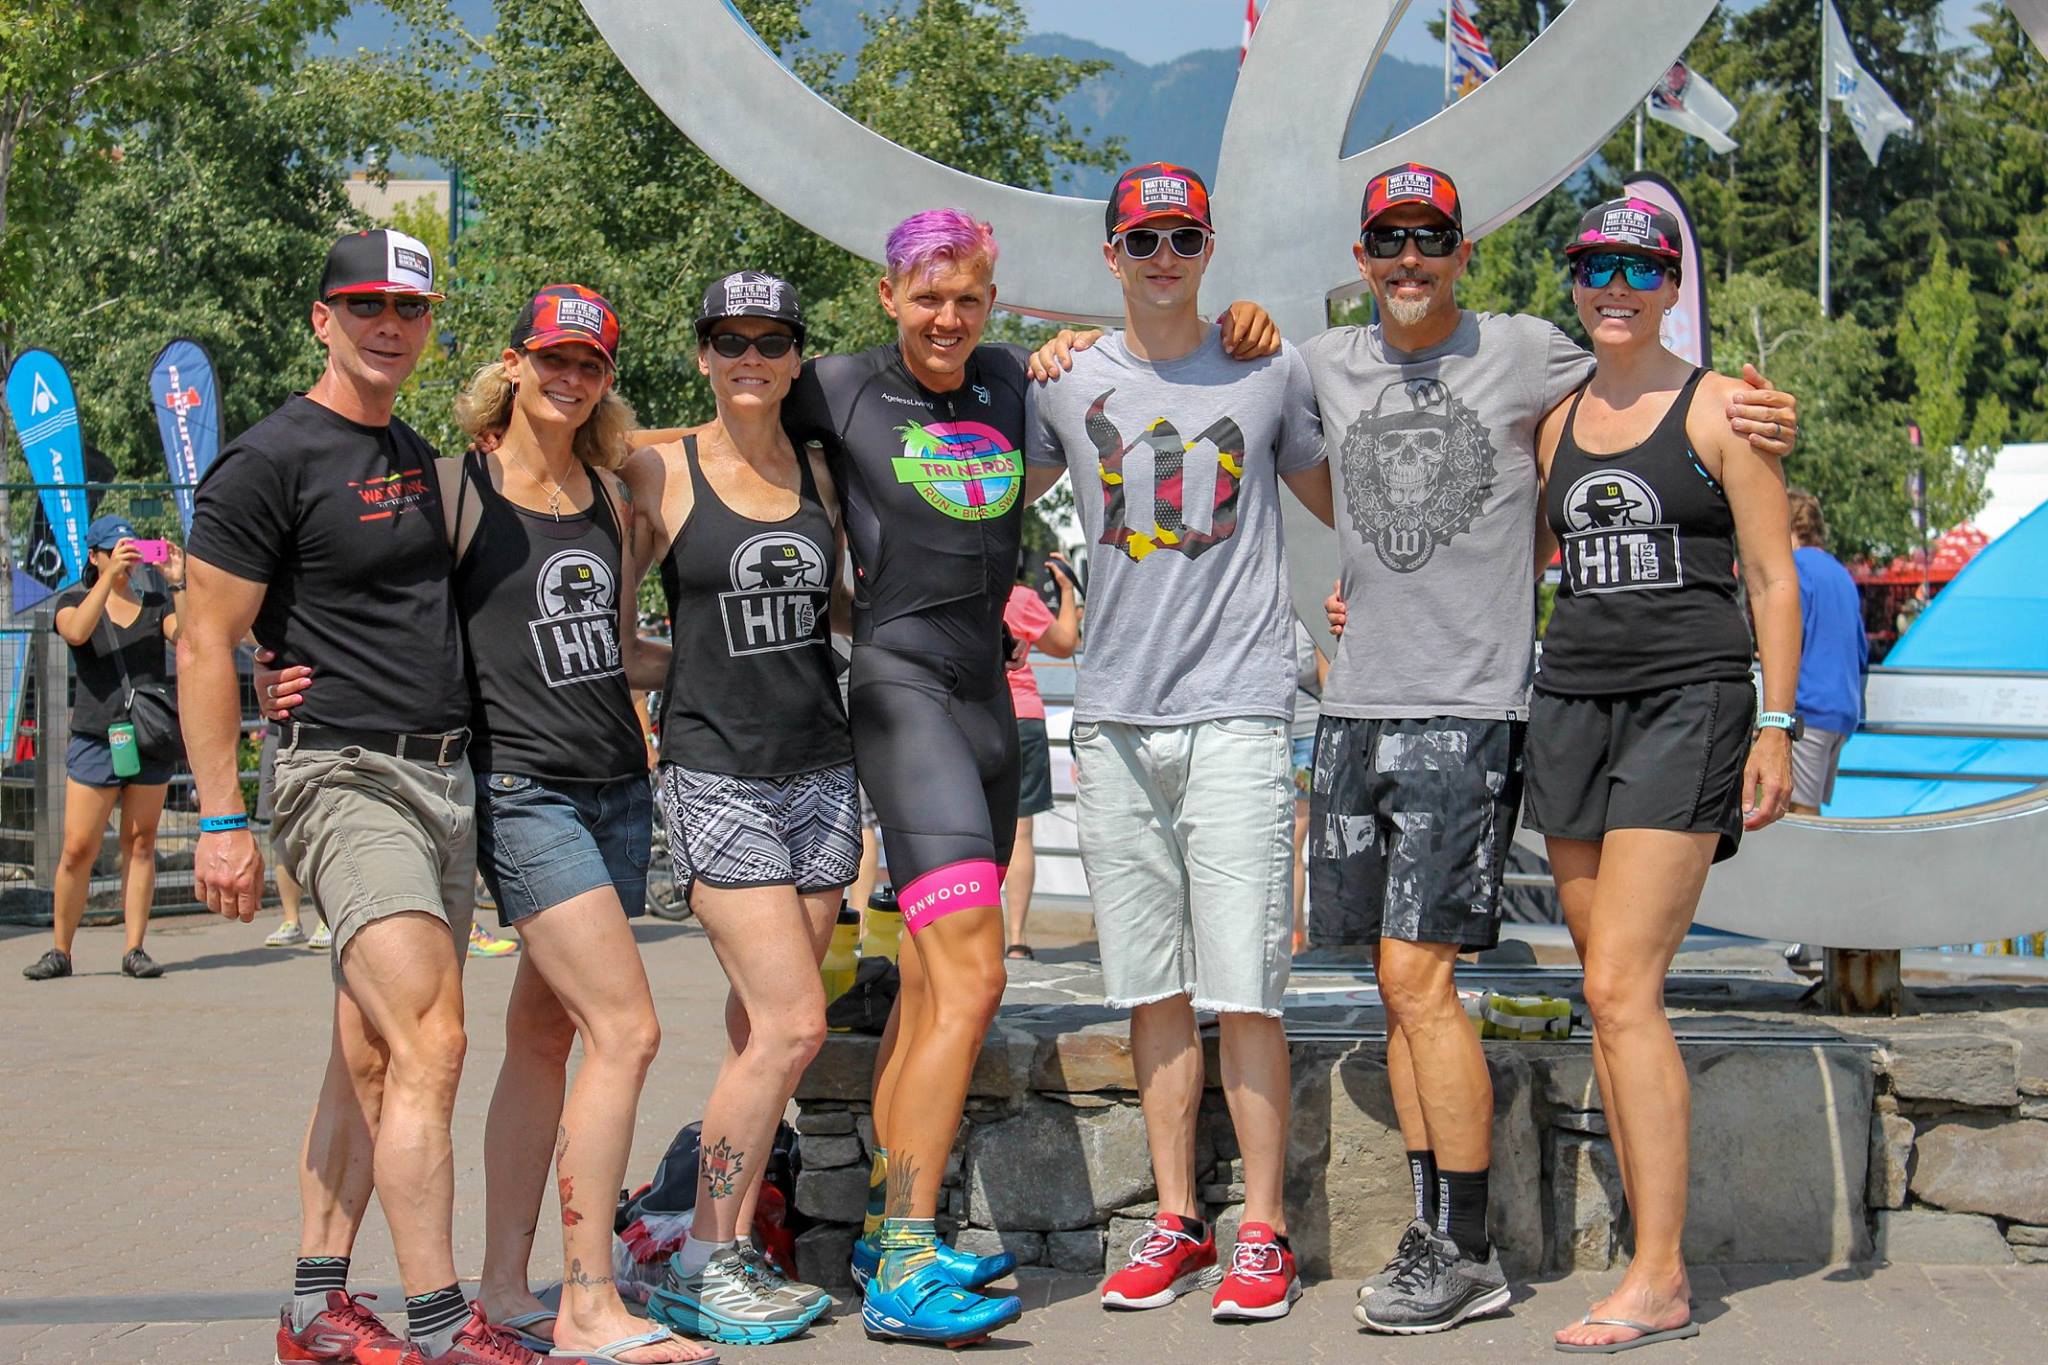 Coach_Terry_Wilson_Pursuit_of_The_Perfect_Race_IRONMAN_Canada_70.3_Roy_McBeth_Olympic_Rings_Wattie_Hit_Squad_2.jpg